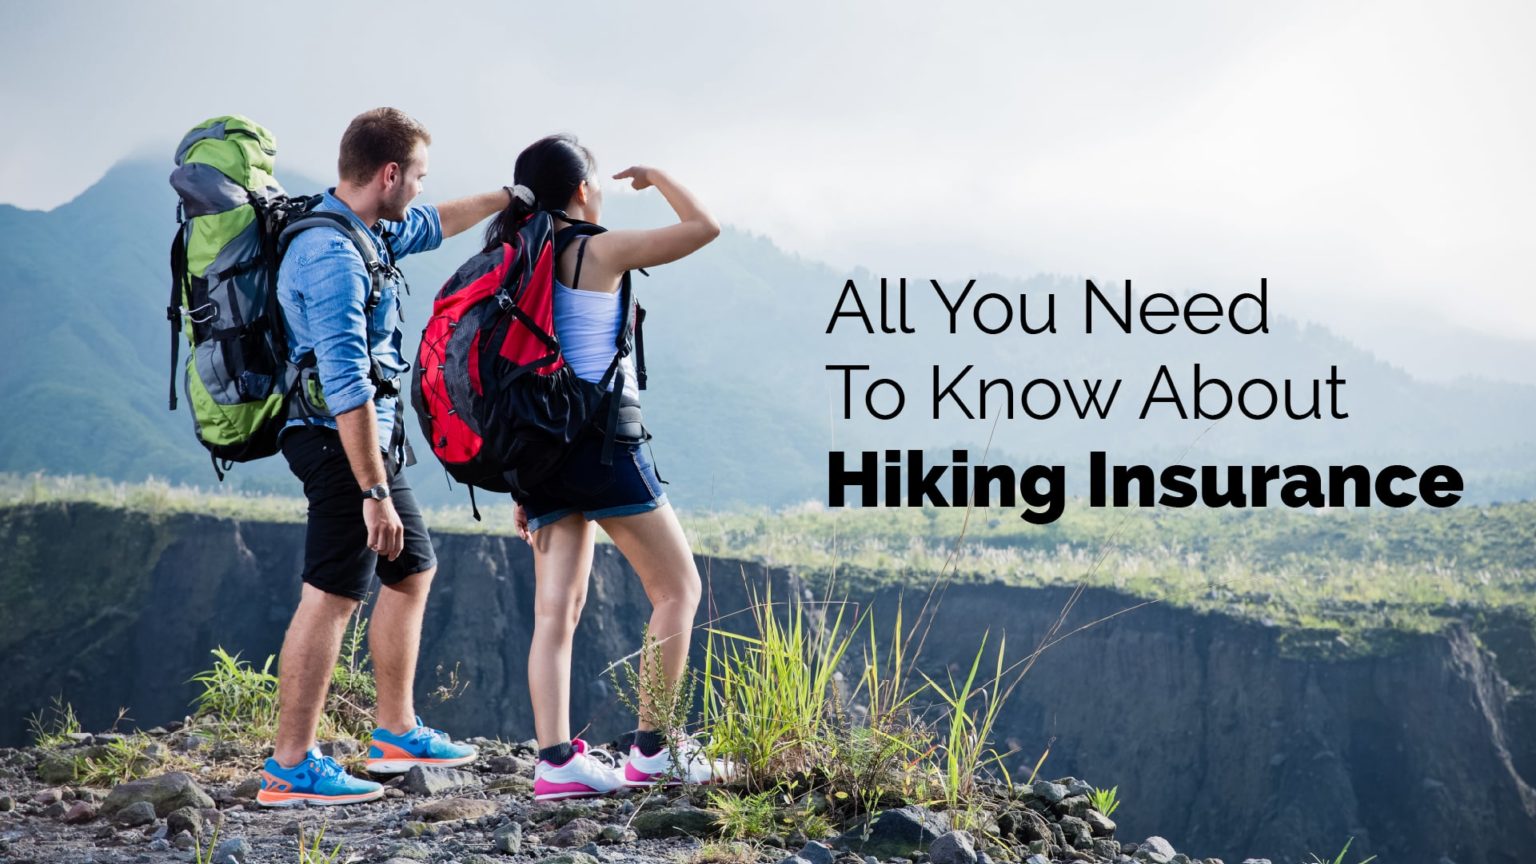 All You Need To Know About Hiking Insurance